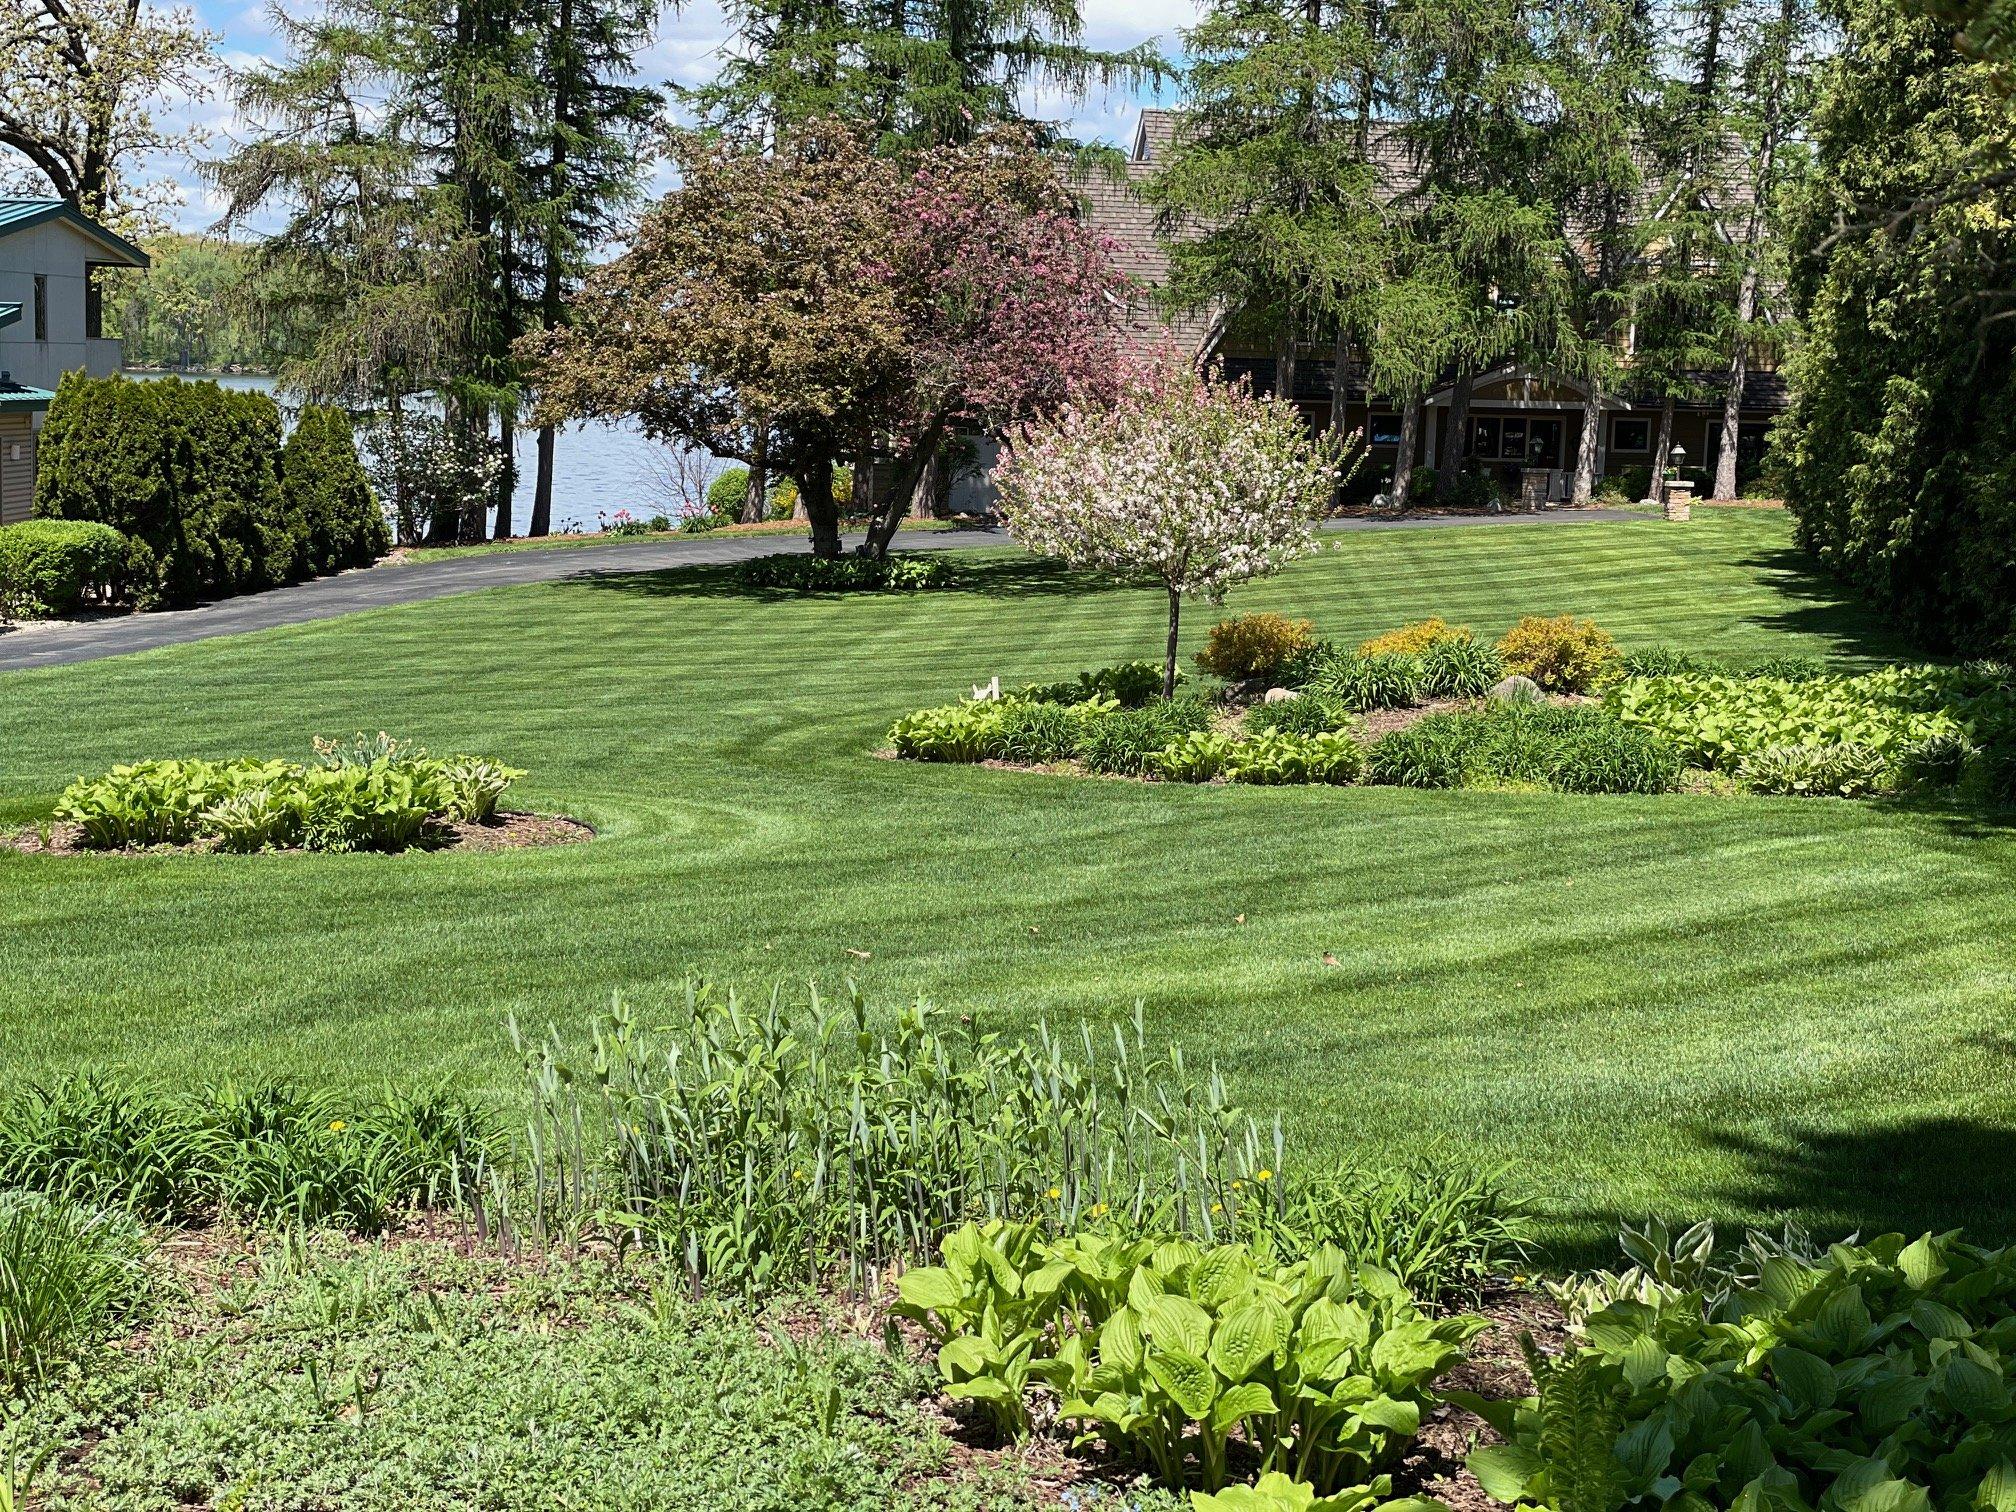 Lawn Care Services by Argent Solutions: Ensuring a Vibrant, Eco-Friendly Lawn